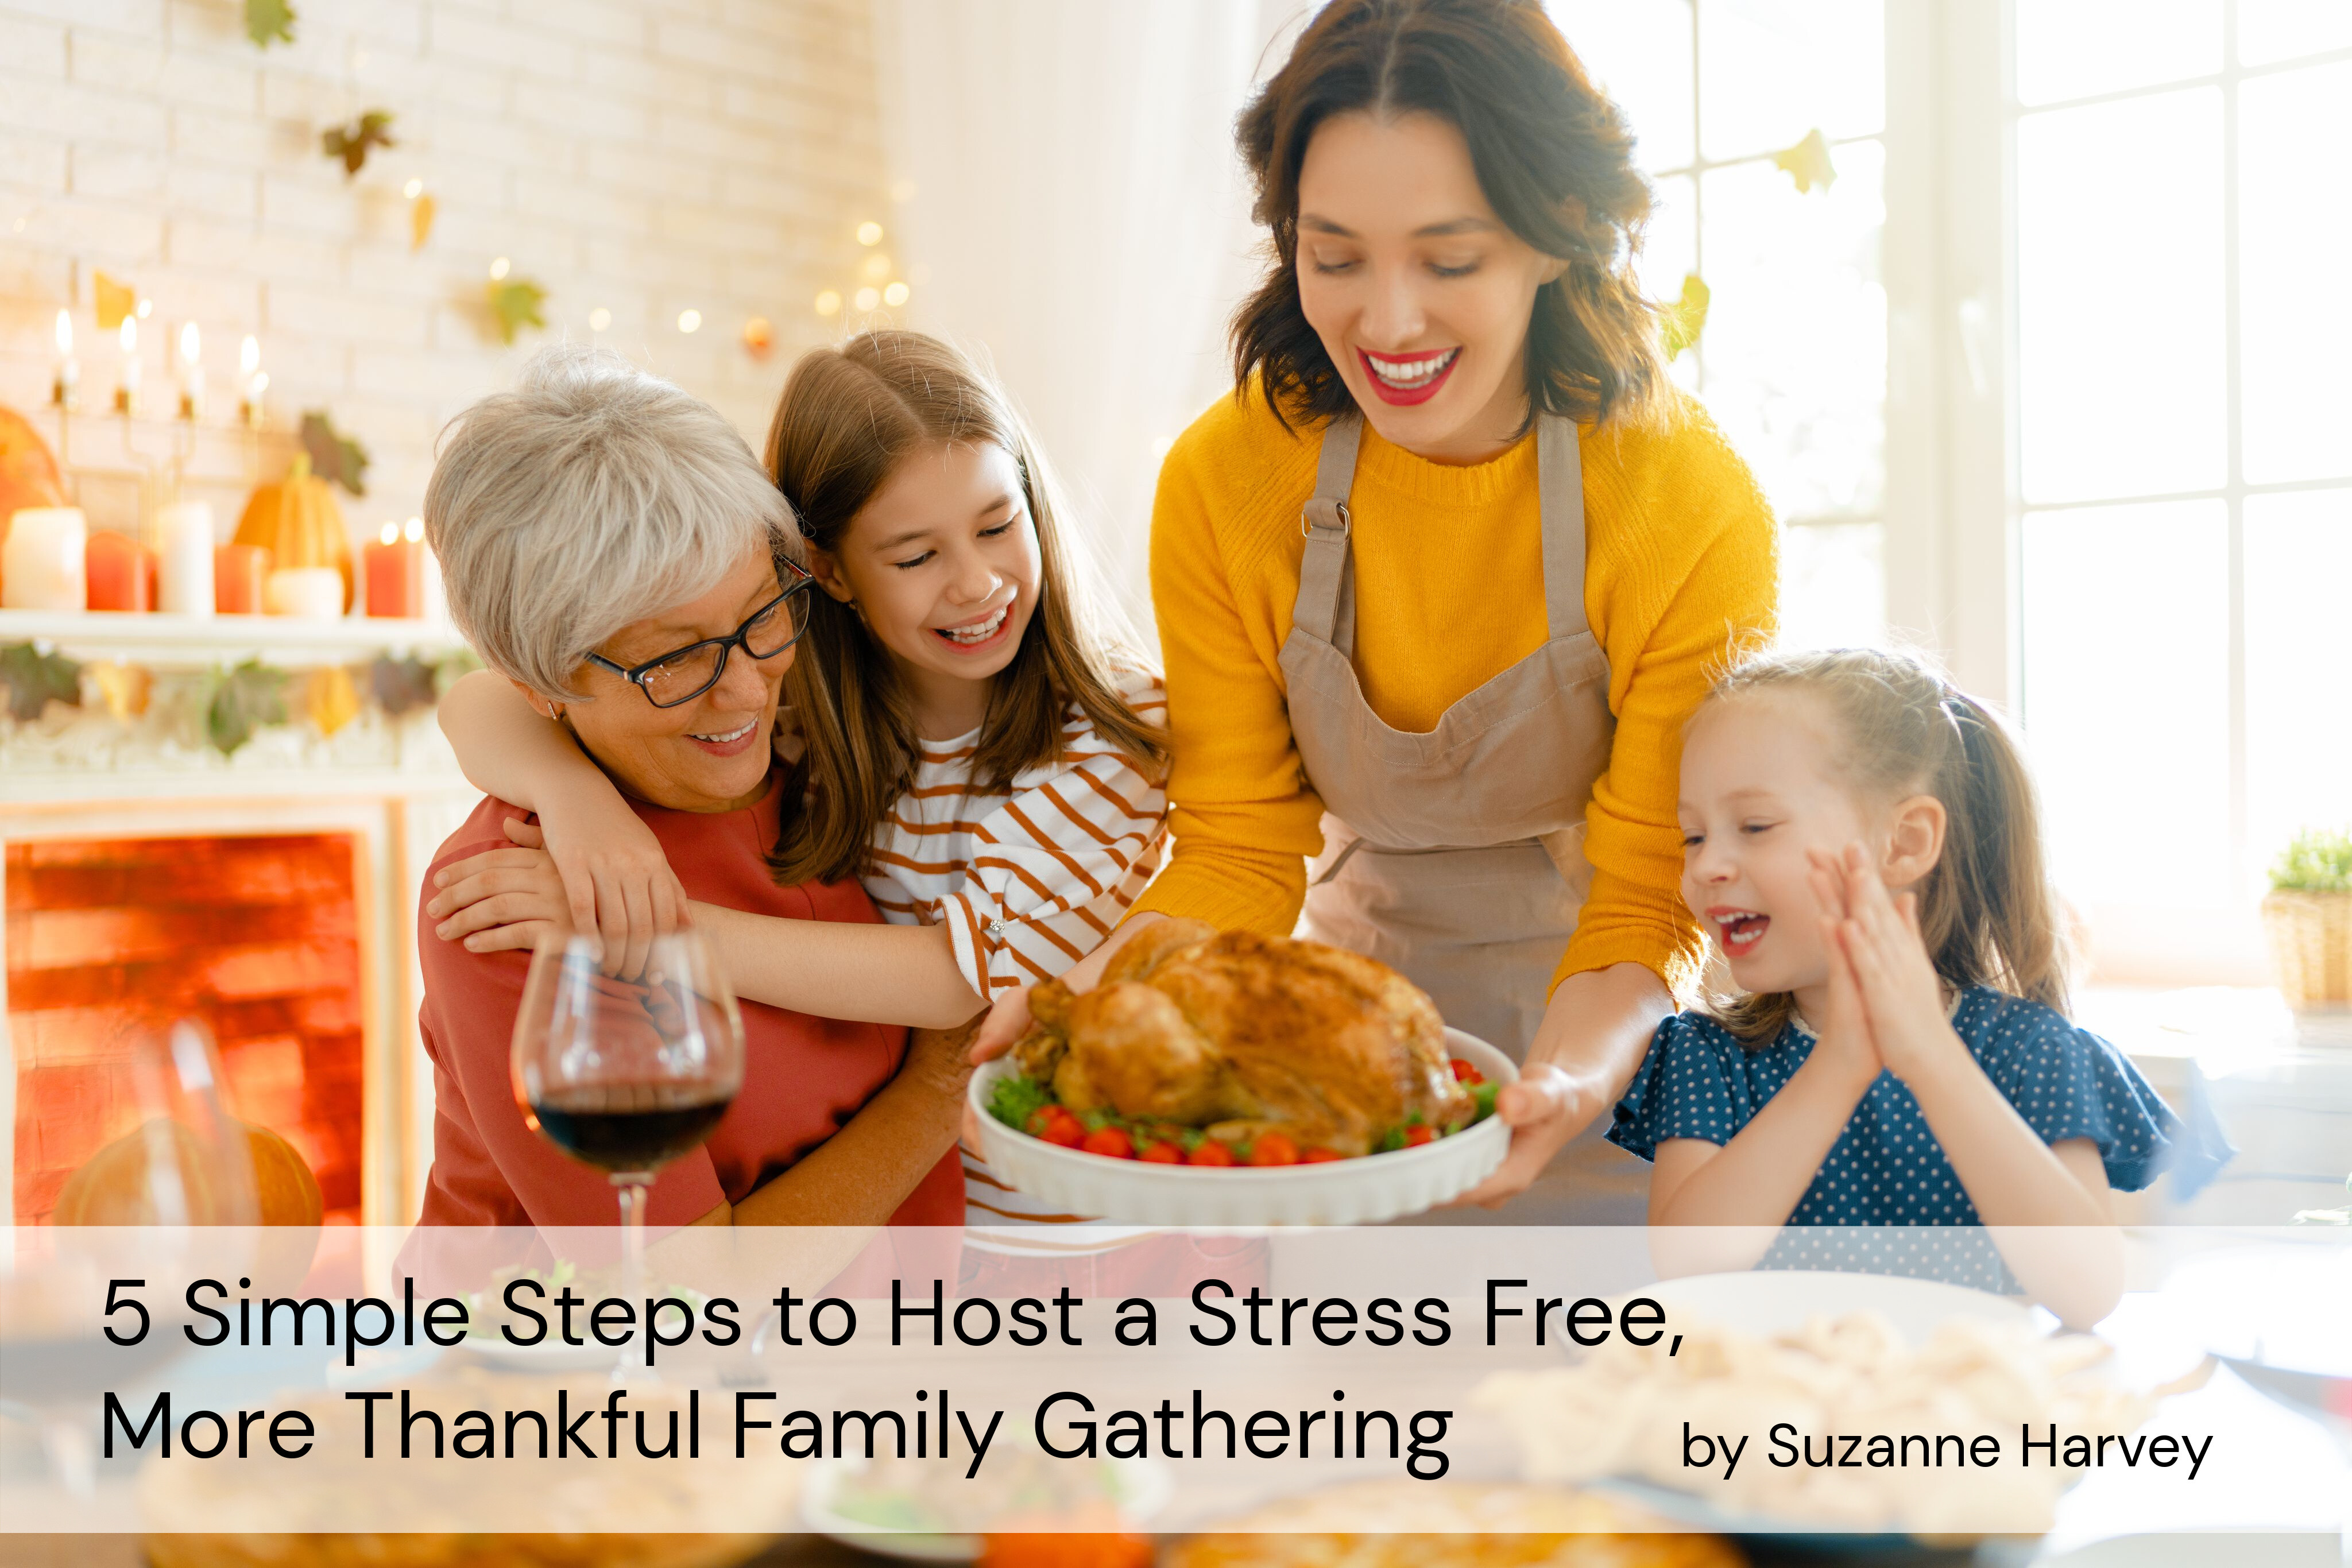 5-simple-steps-to-host-a-stress-free-more-thankful-family-gathering